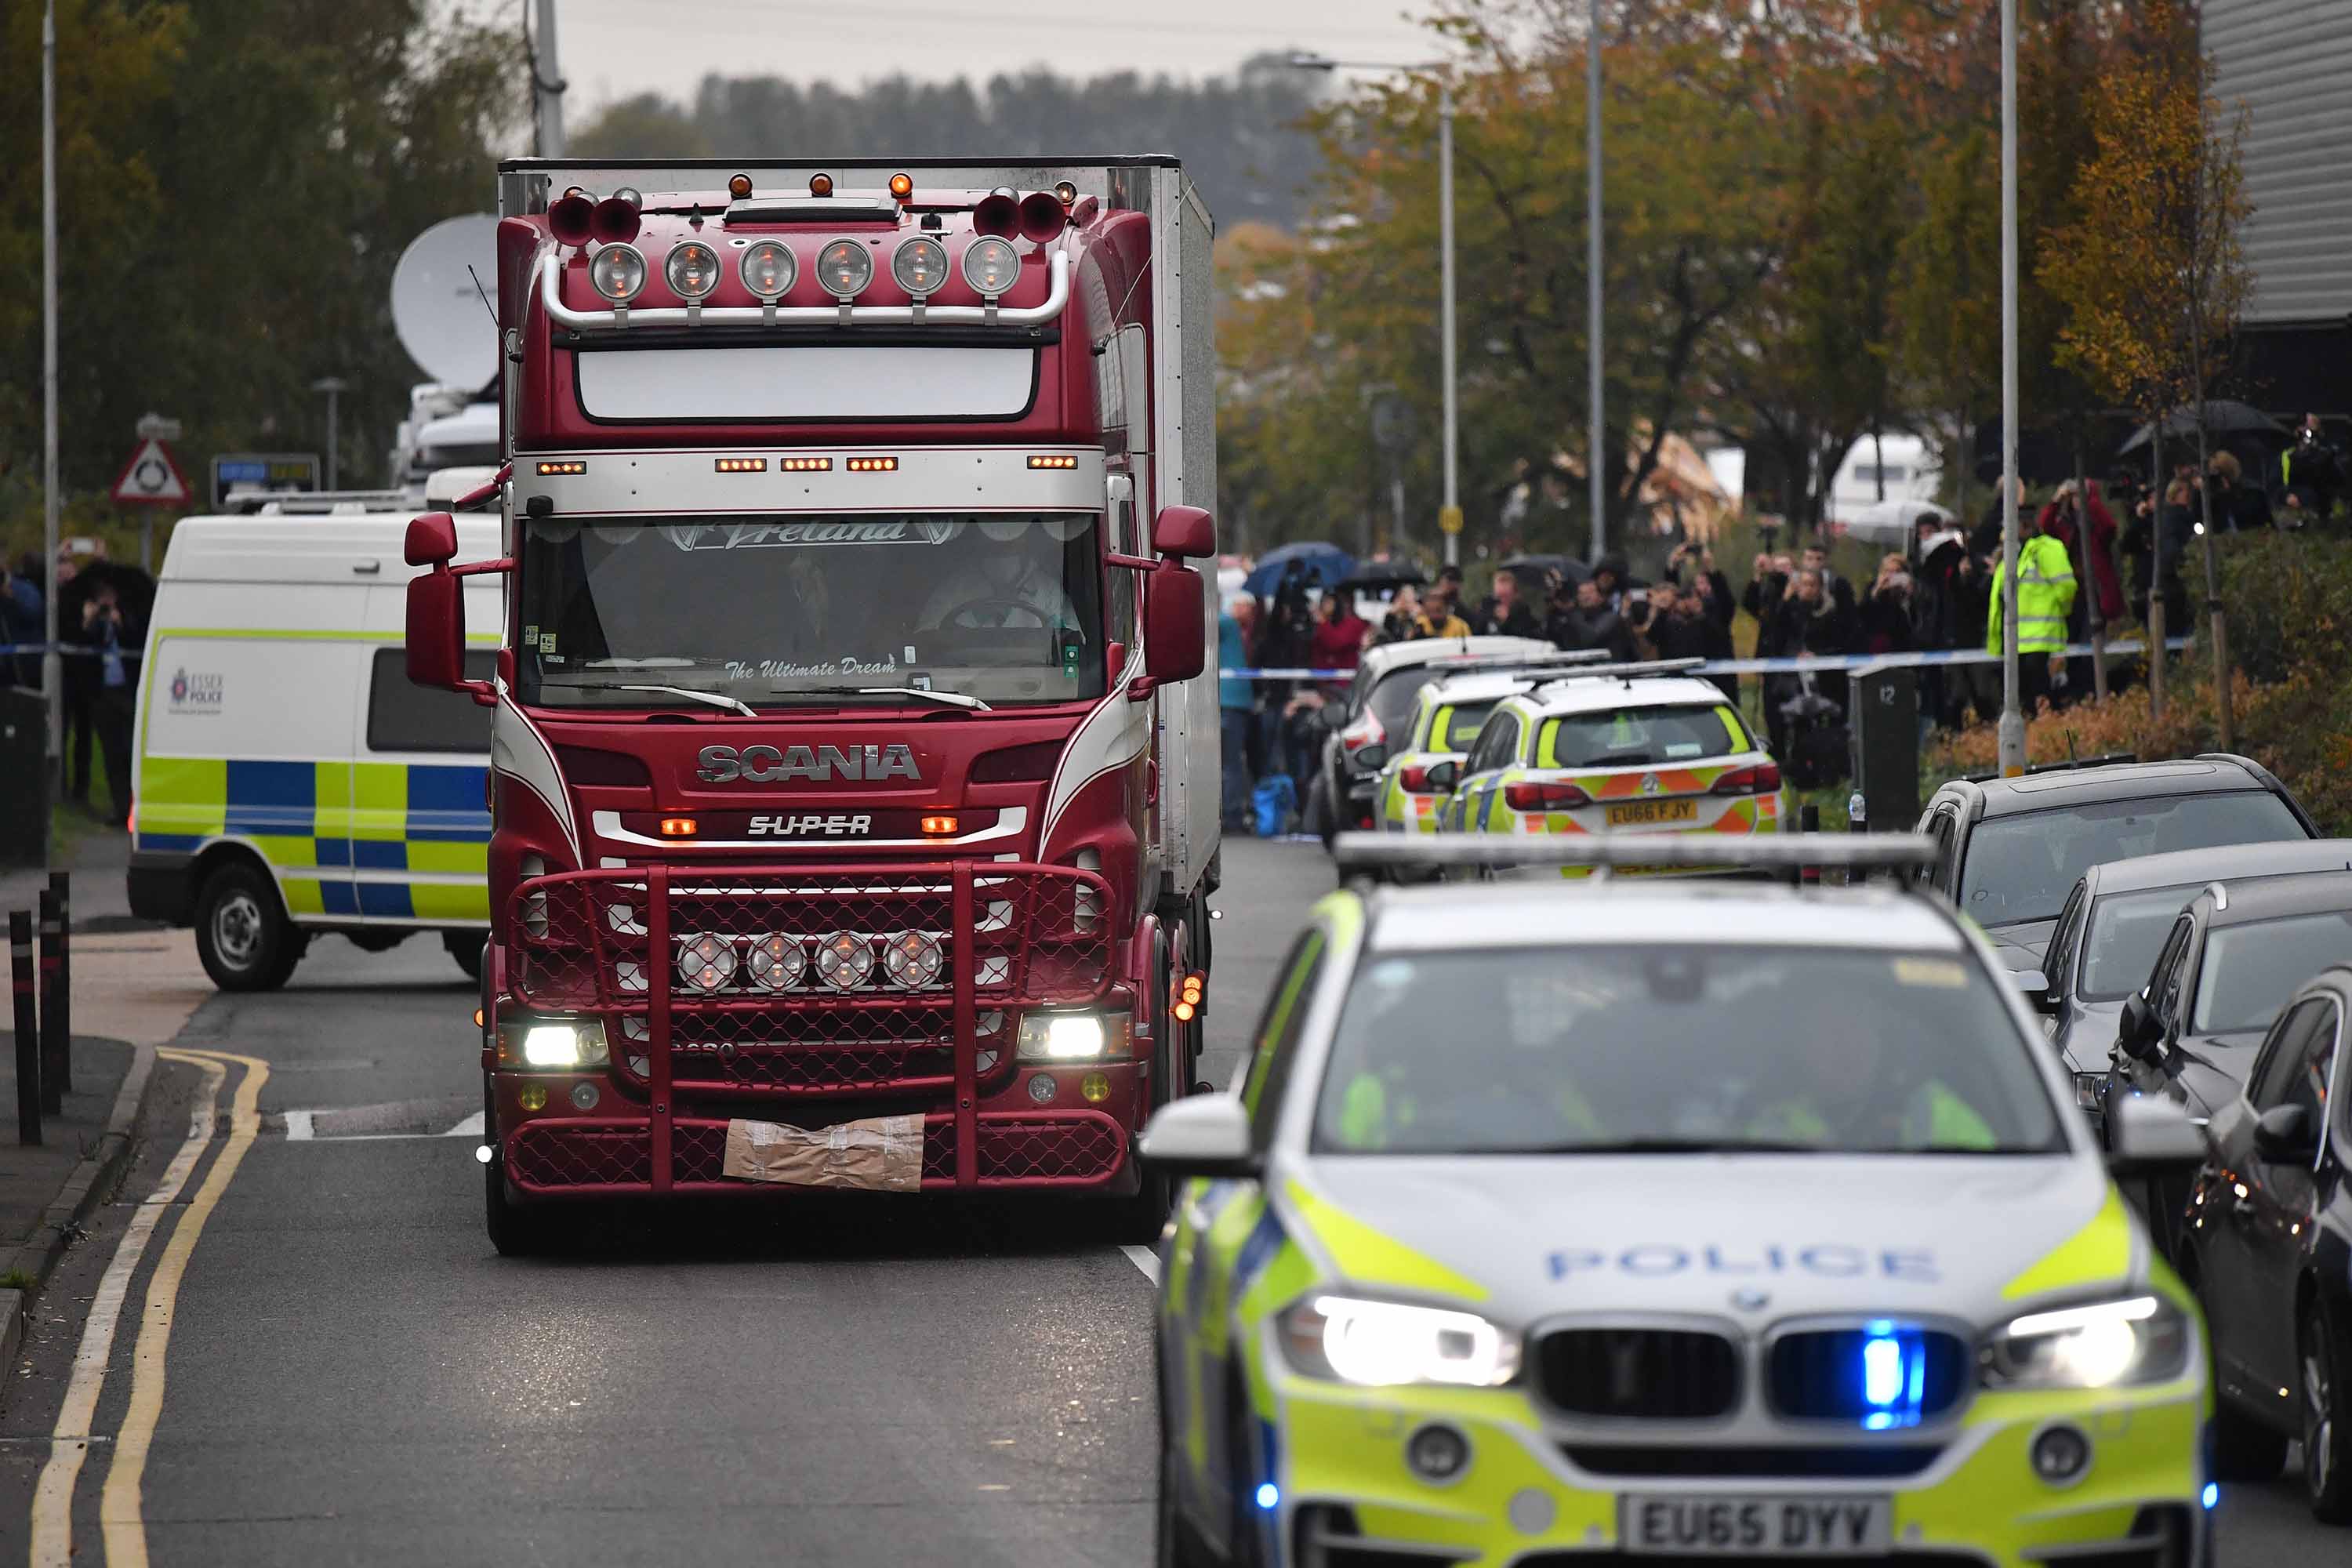 Police identify 39 people found dead in Essex truck as Chinese nationals